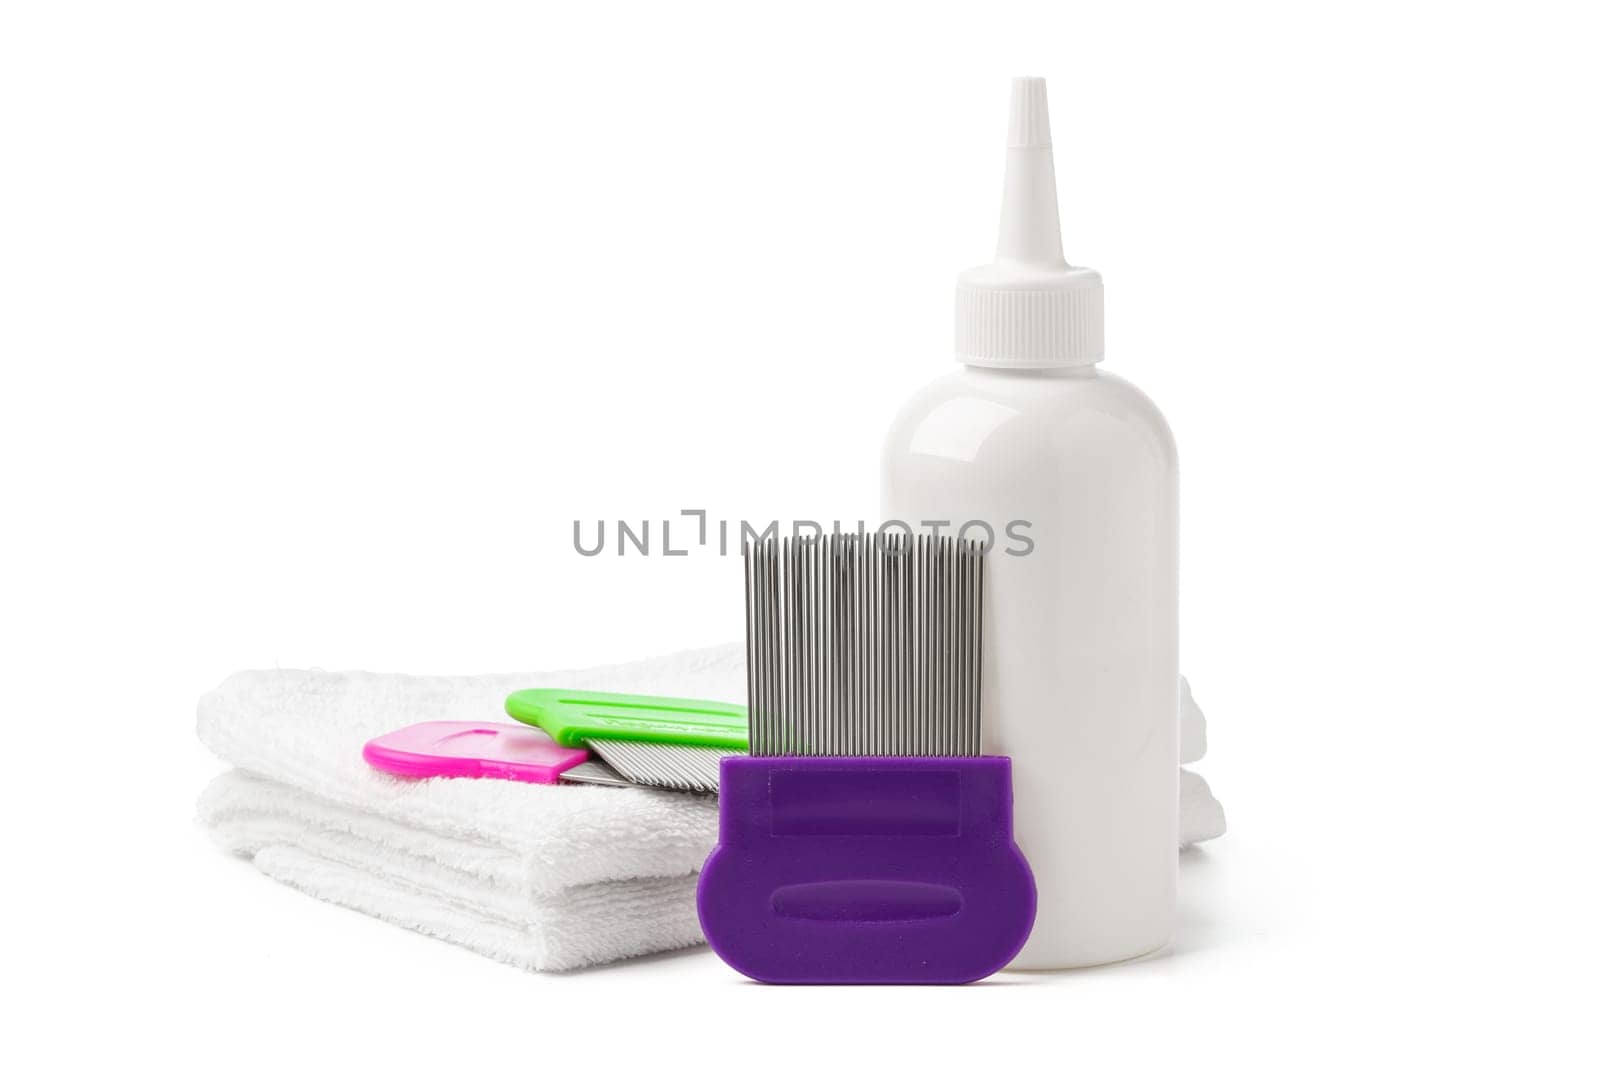 Comb, anti lice medicine and towel on white background close up